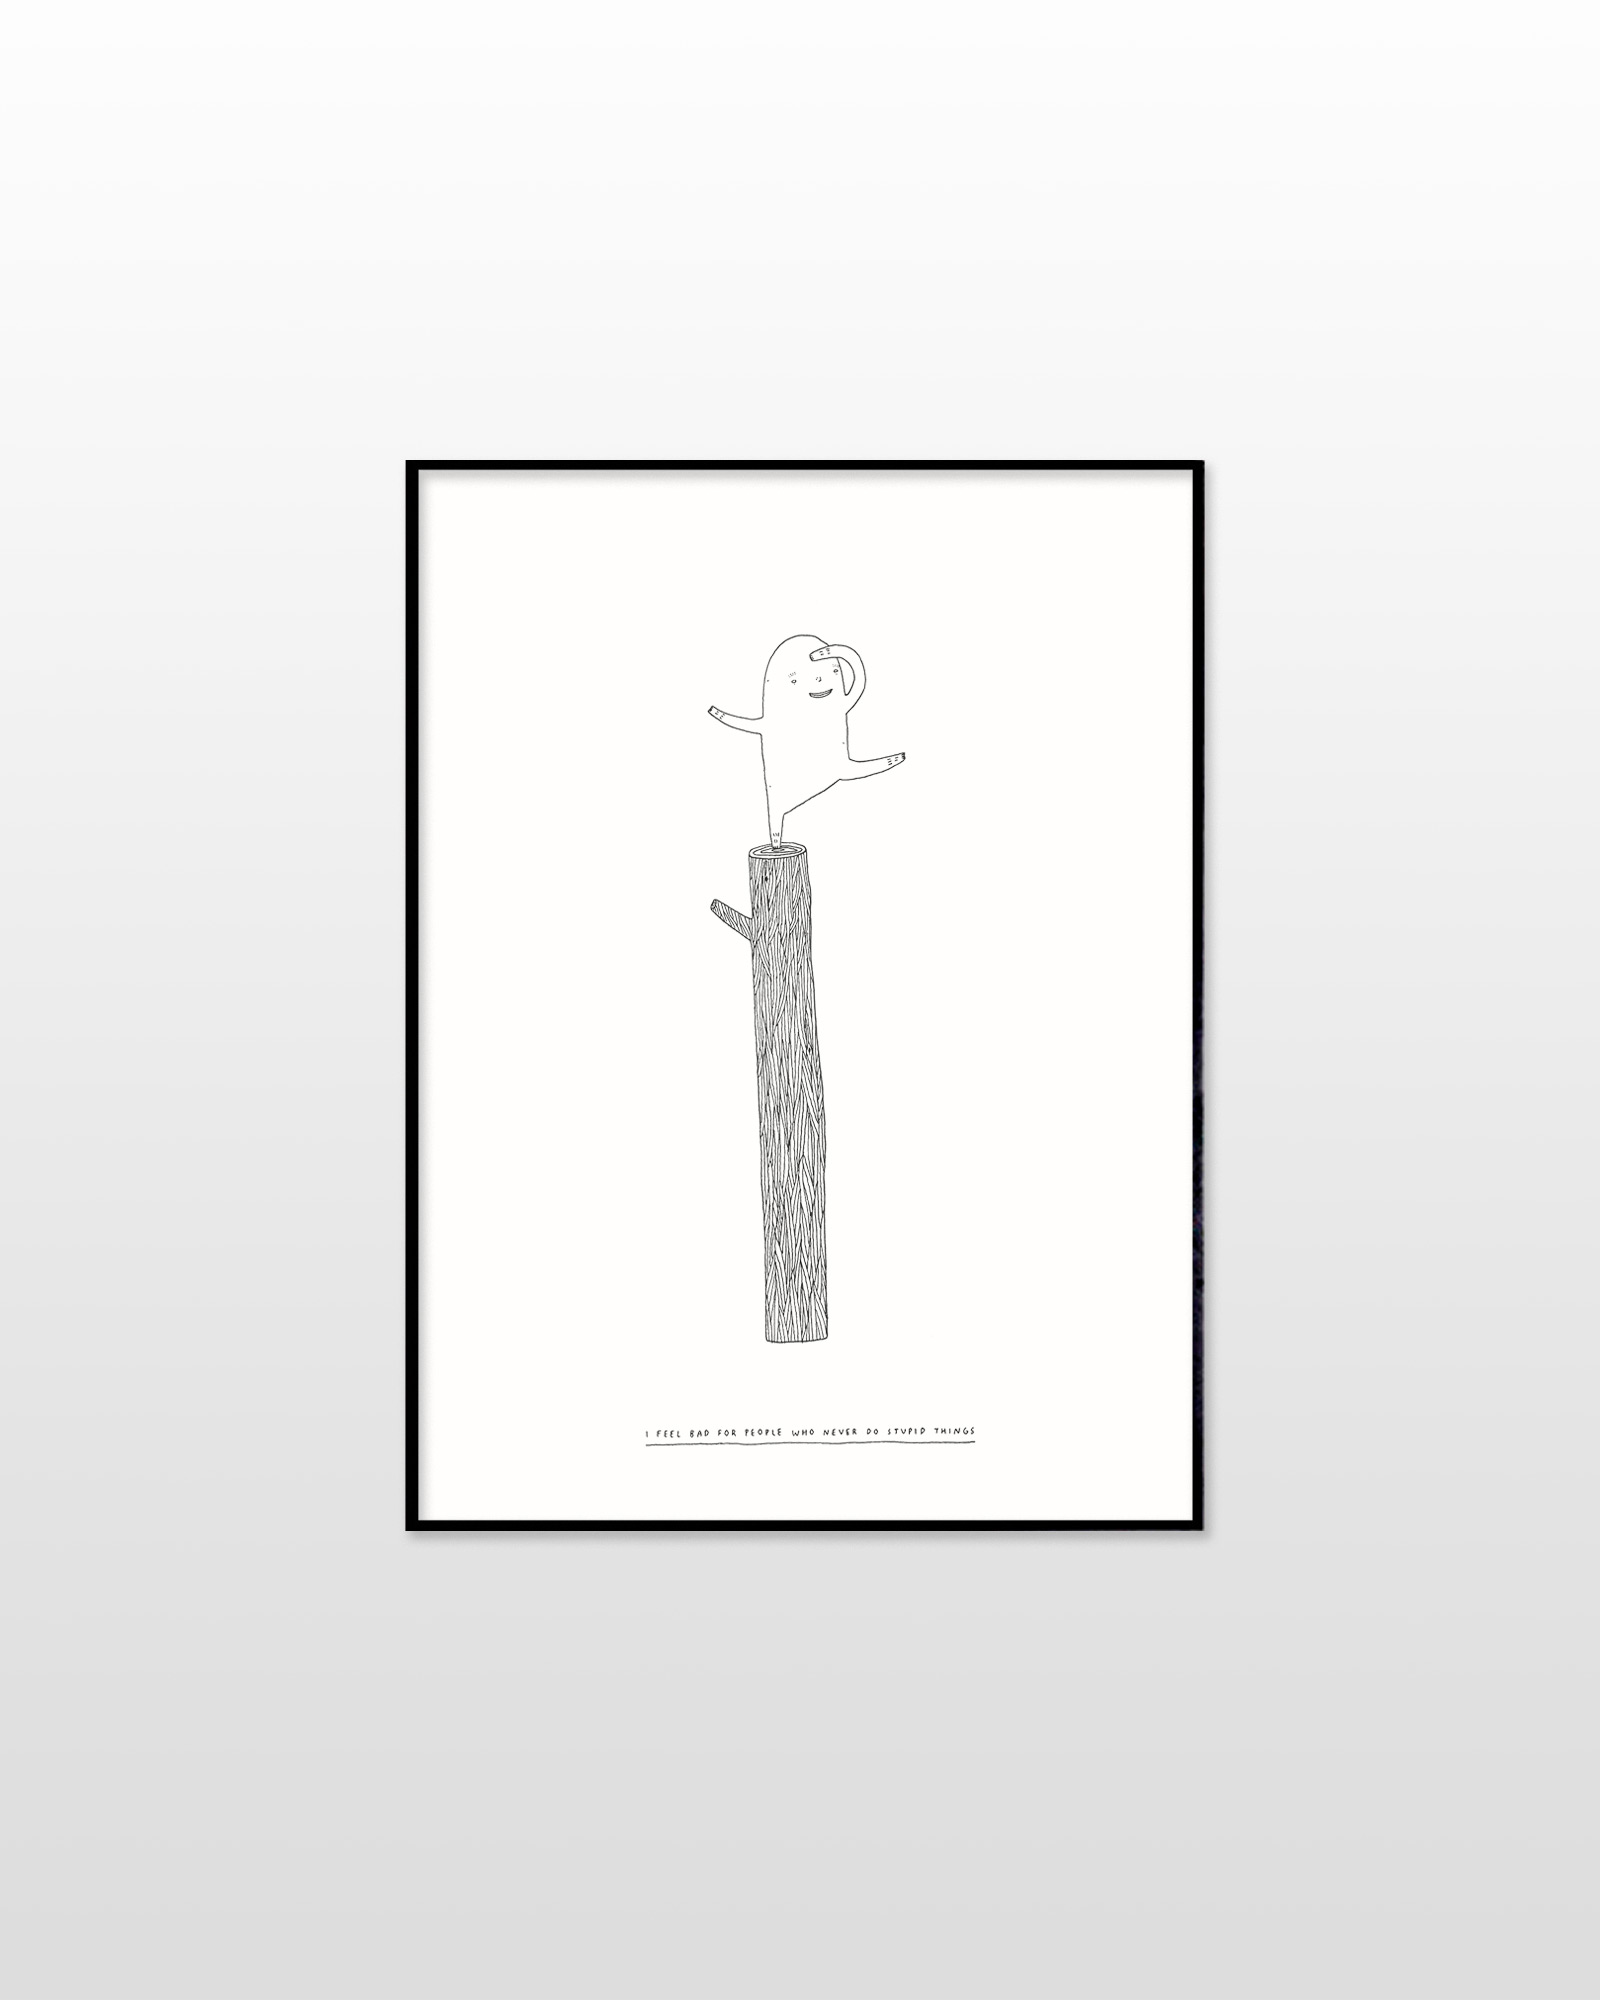 posters-prints, giclee-print, family-friendly, illustrative, minimalistic, monochrome, cartoons, humor, black, white, ink, paper, amusing, black-and-white, contemporary-art, cute, danish, decorative, design, interior, interior-design, modern, modern-art, nordic, posters, prints, scandinavien, Buy original high quality art. Paintings, drawings, limited edition prints & posters by talented artists.